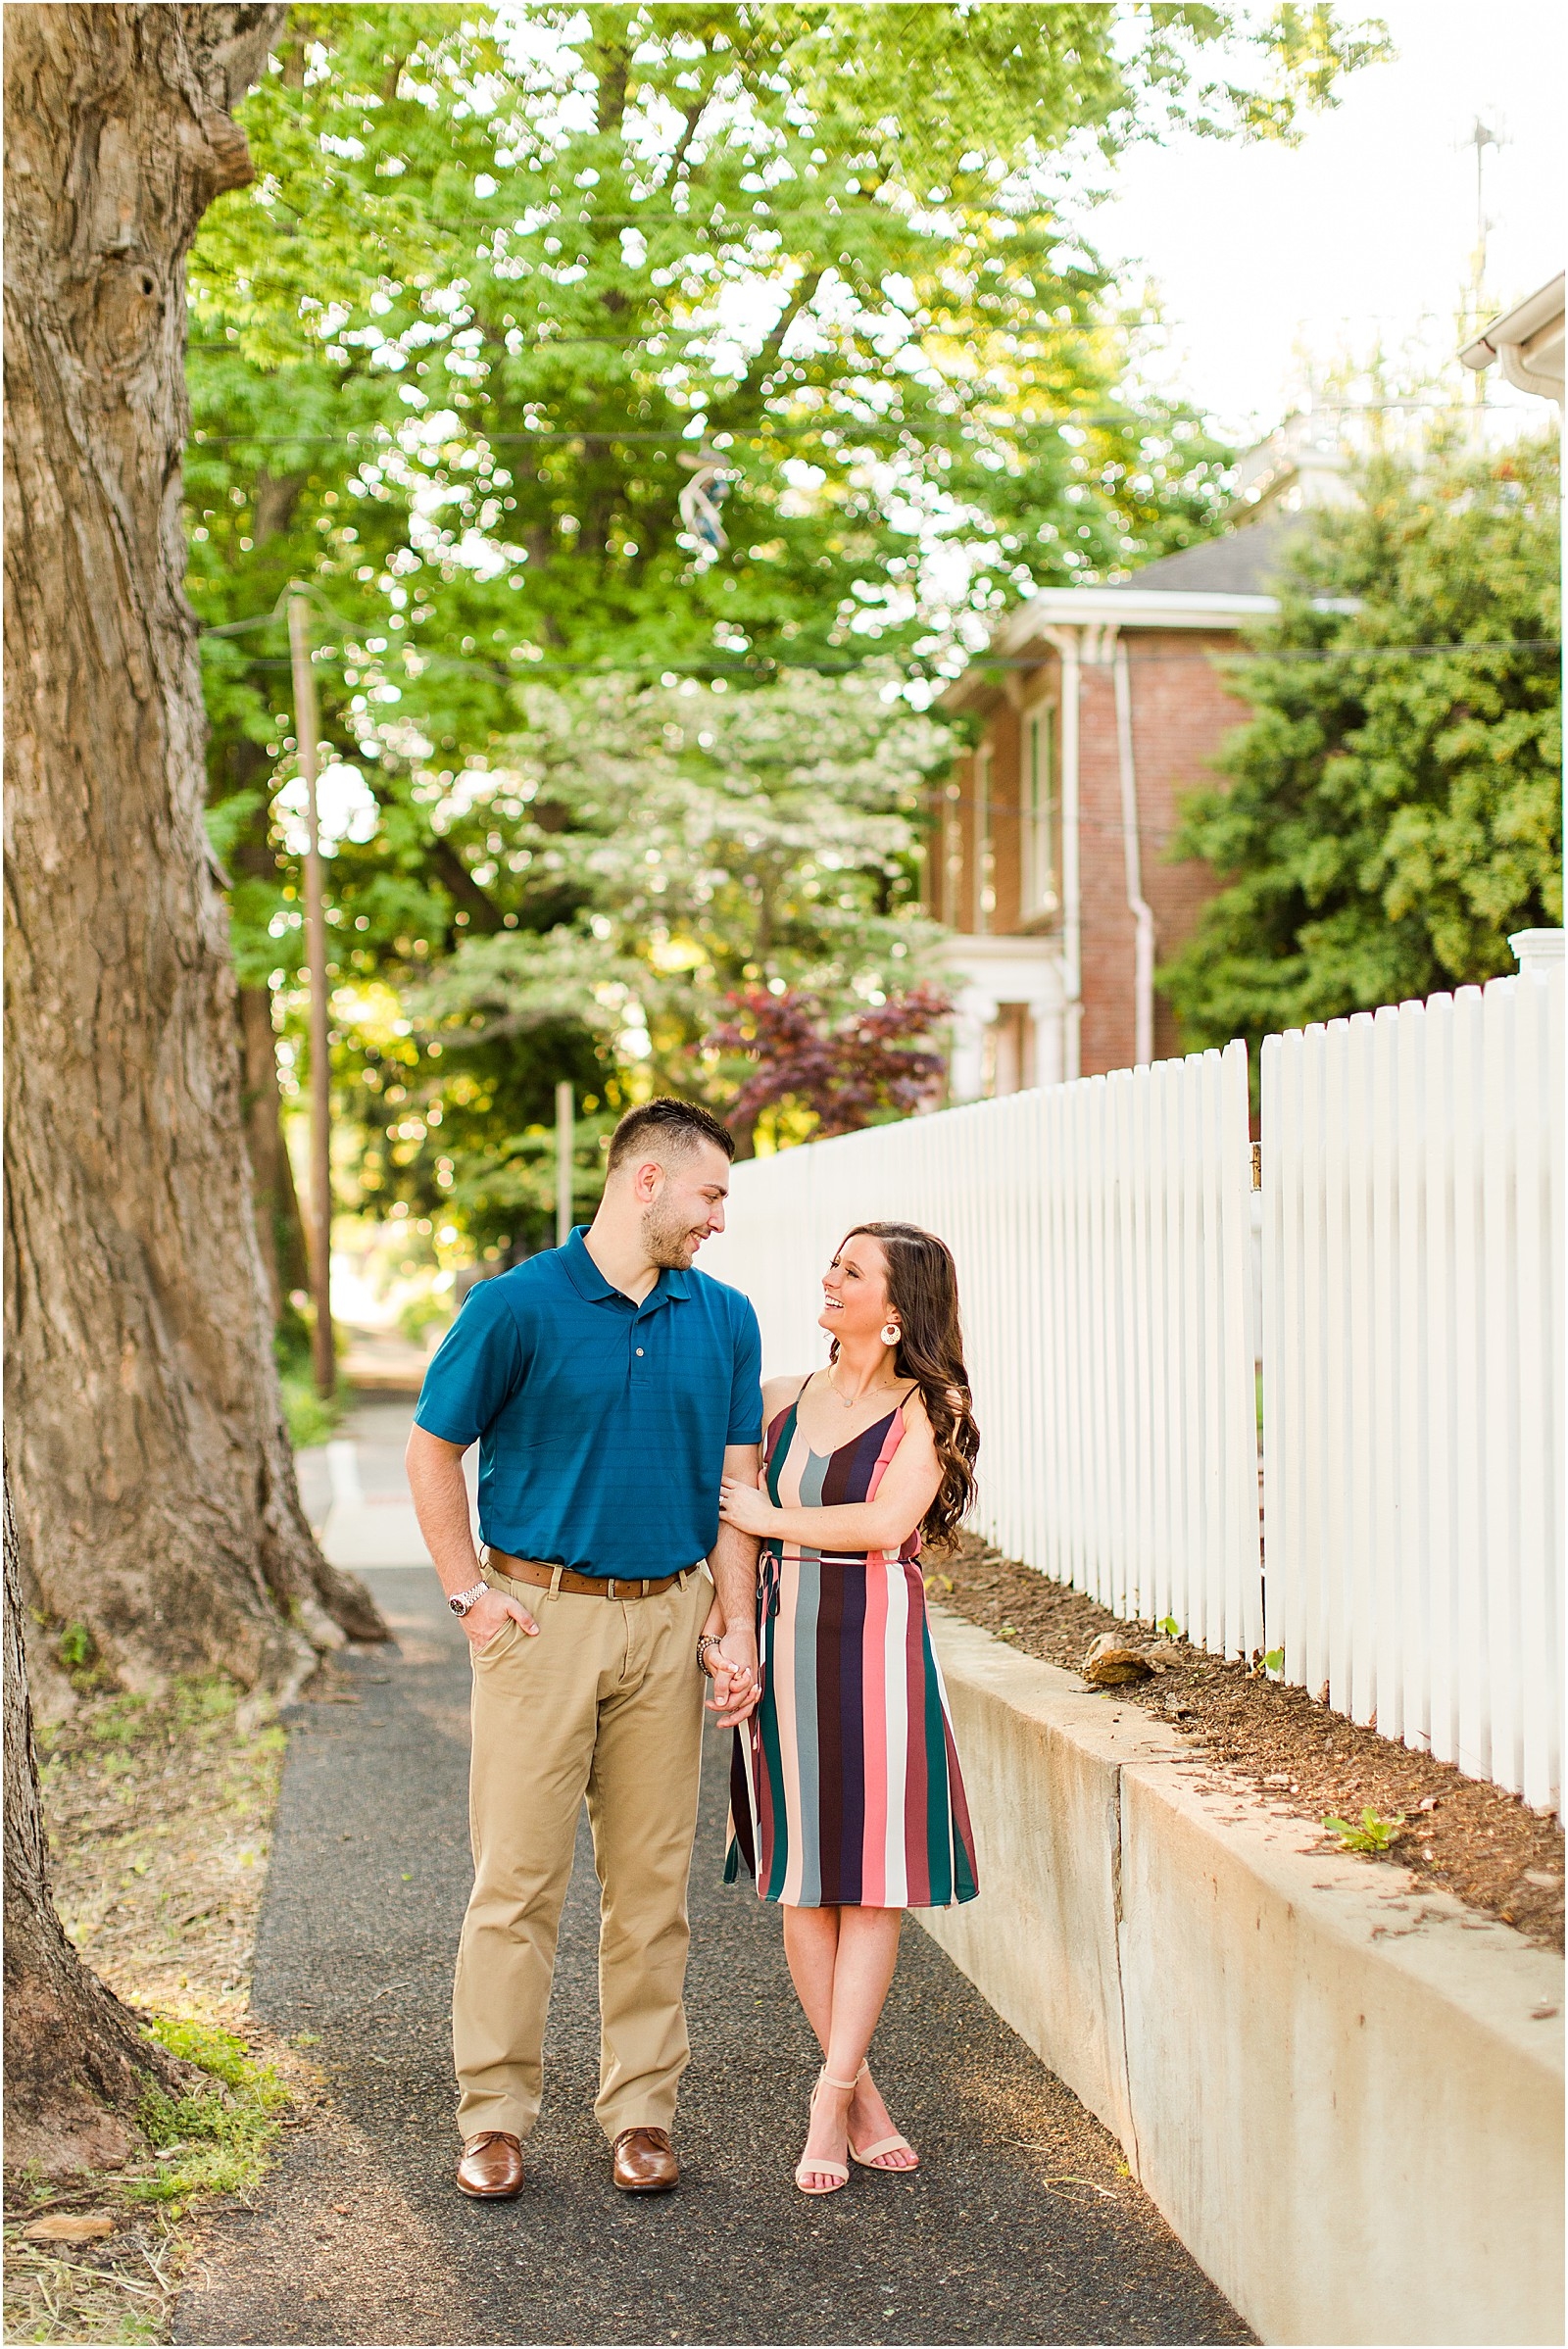 Downtown Newburgh Engagement Session | Matt and Blaire | Bret and Brandie Photography016.jpg